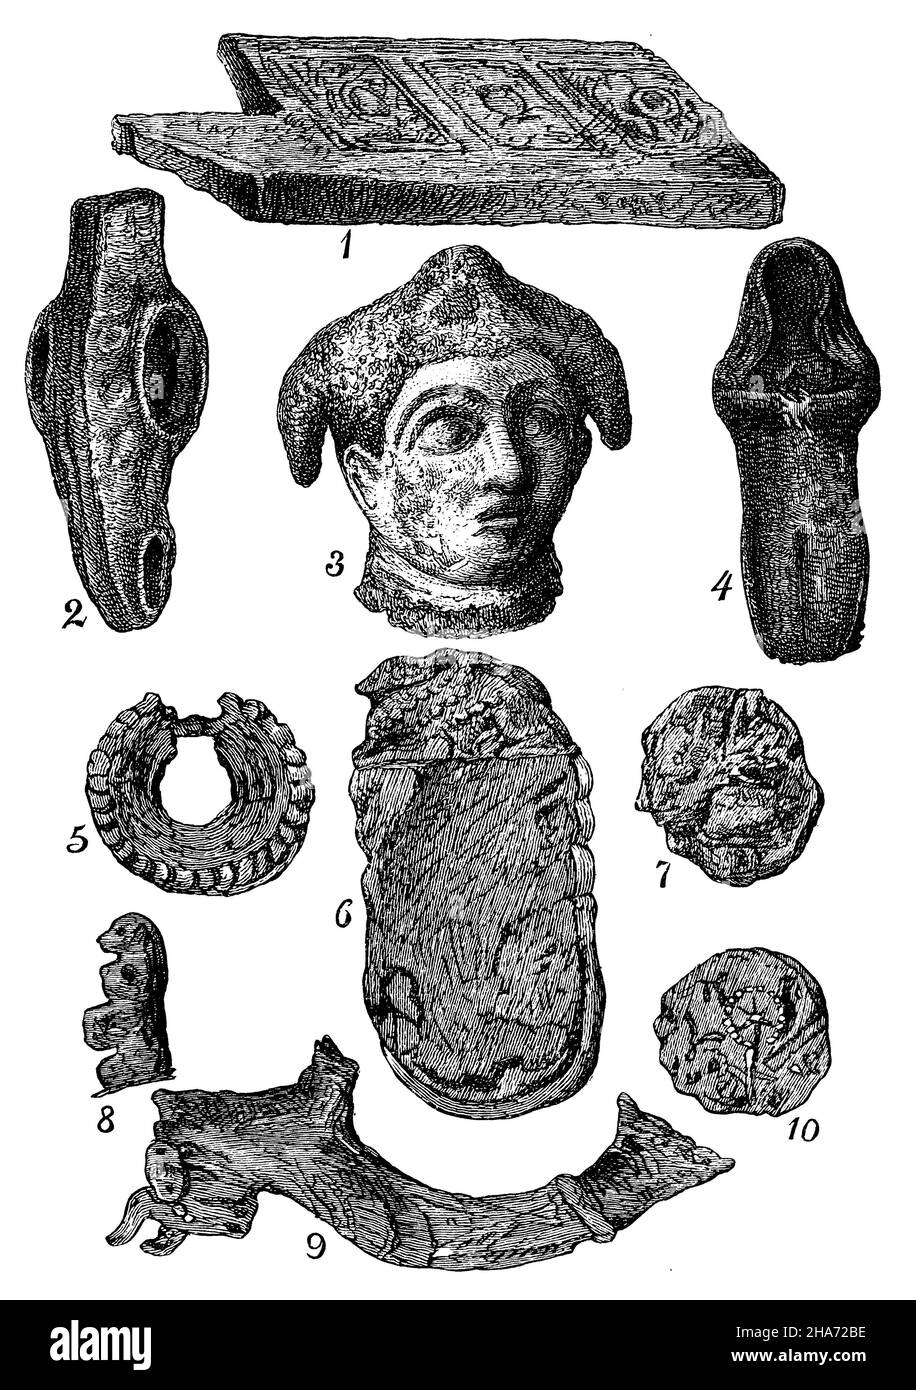 Babylonian antiquities. 1 door sill from Nebuchadnezzar's palace, 2 & 4 axes, 3 stone head, 5 silver ornament, 6 stone with sphinx-like figure, 7 & 10 coin (front and back), 8 figure of a monkey, 9 silver handle from drinking vessel., ,  (art history book, 1887) Stock Photo